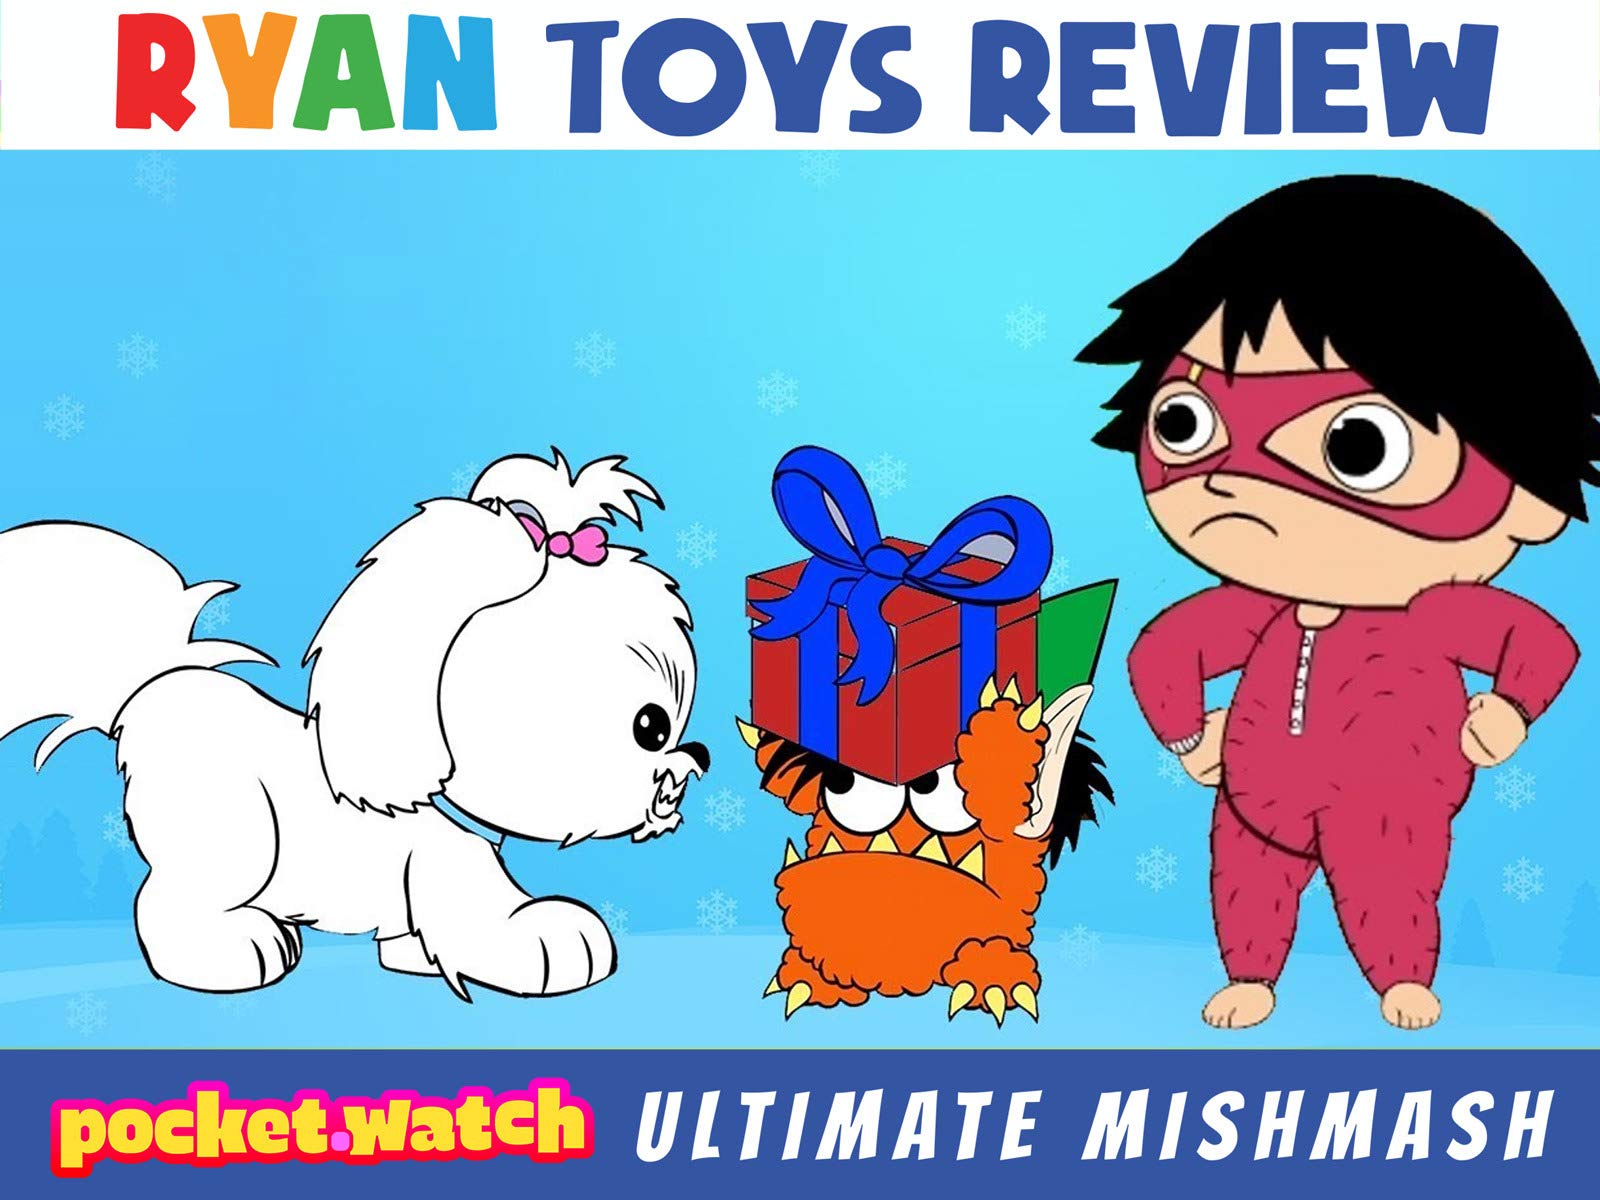 pocket.watch Ryan Toys Review Ultimate mishmash